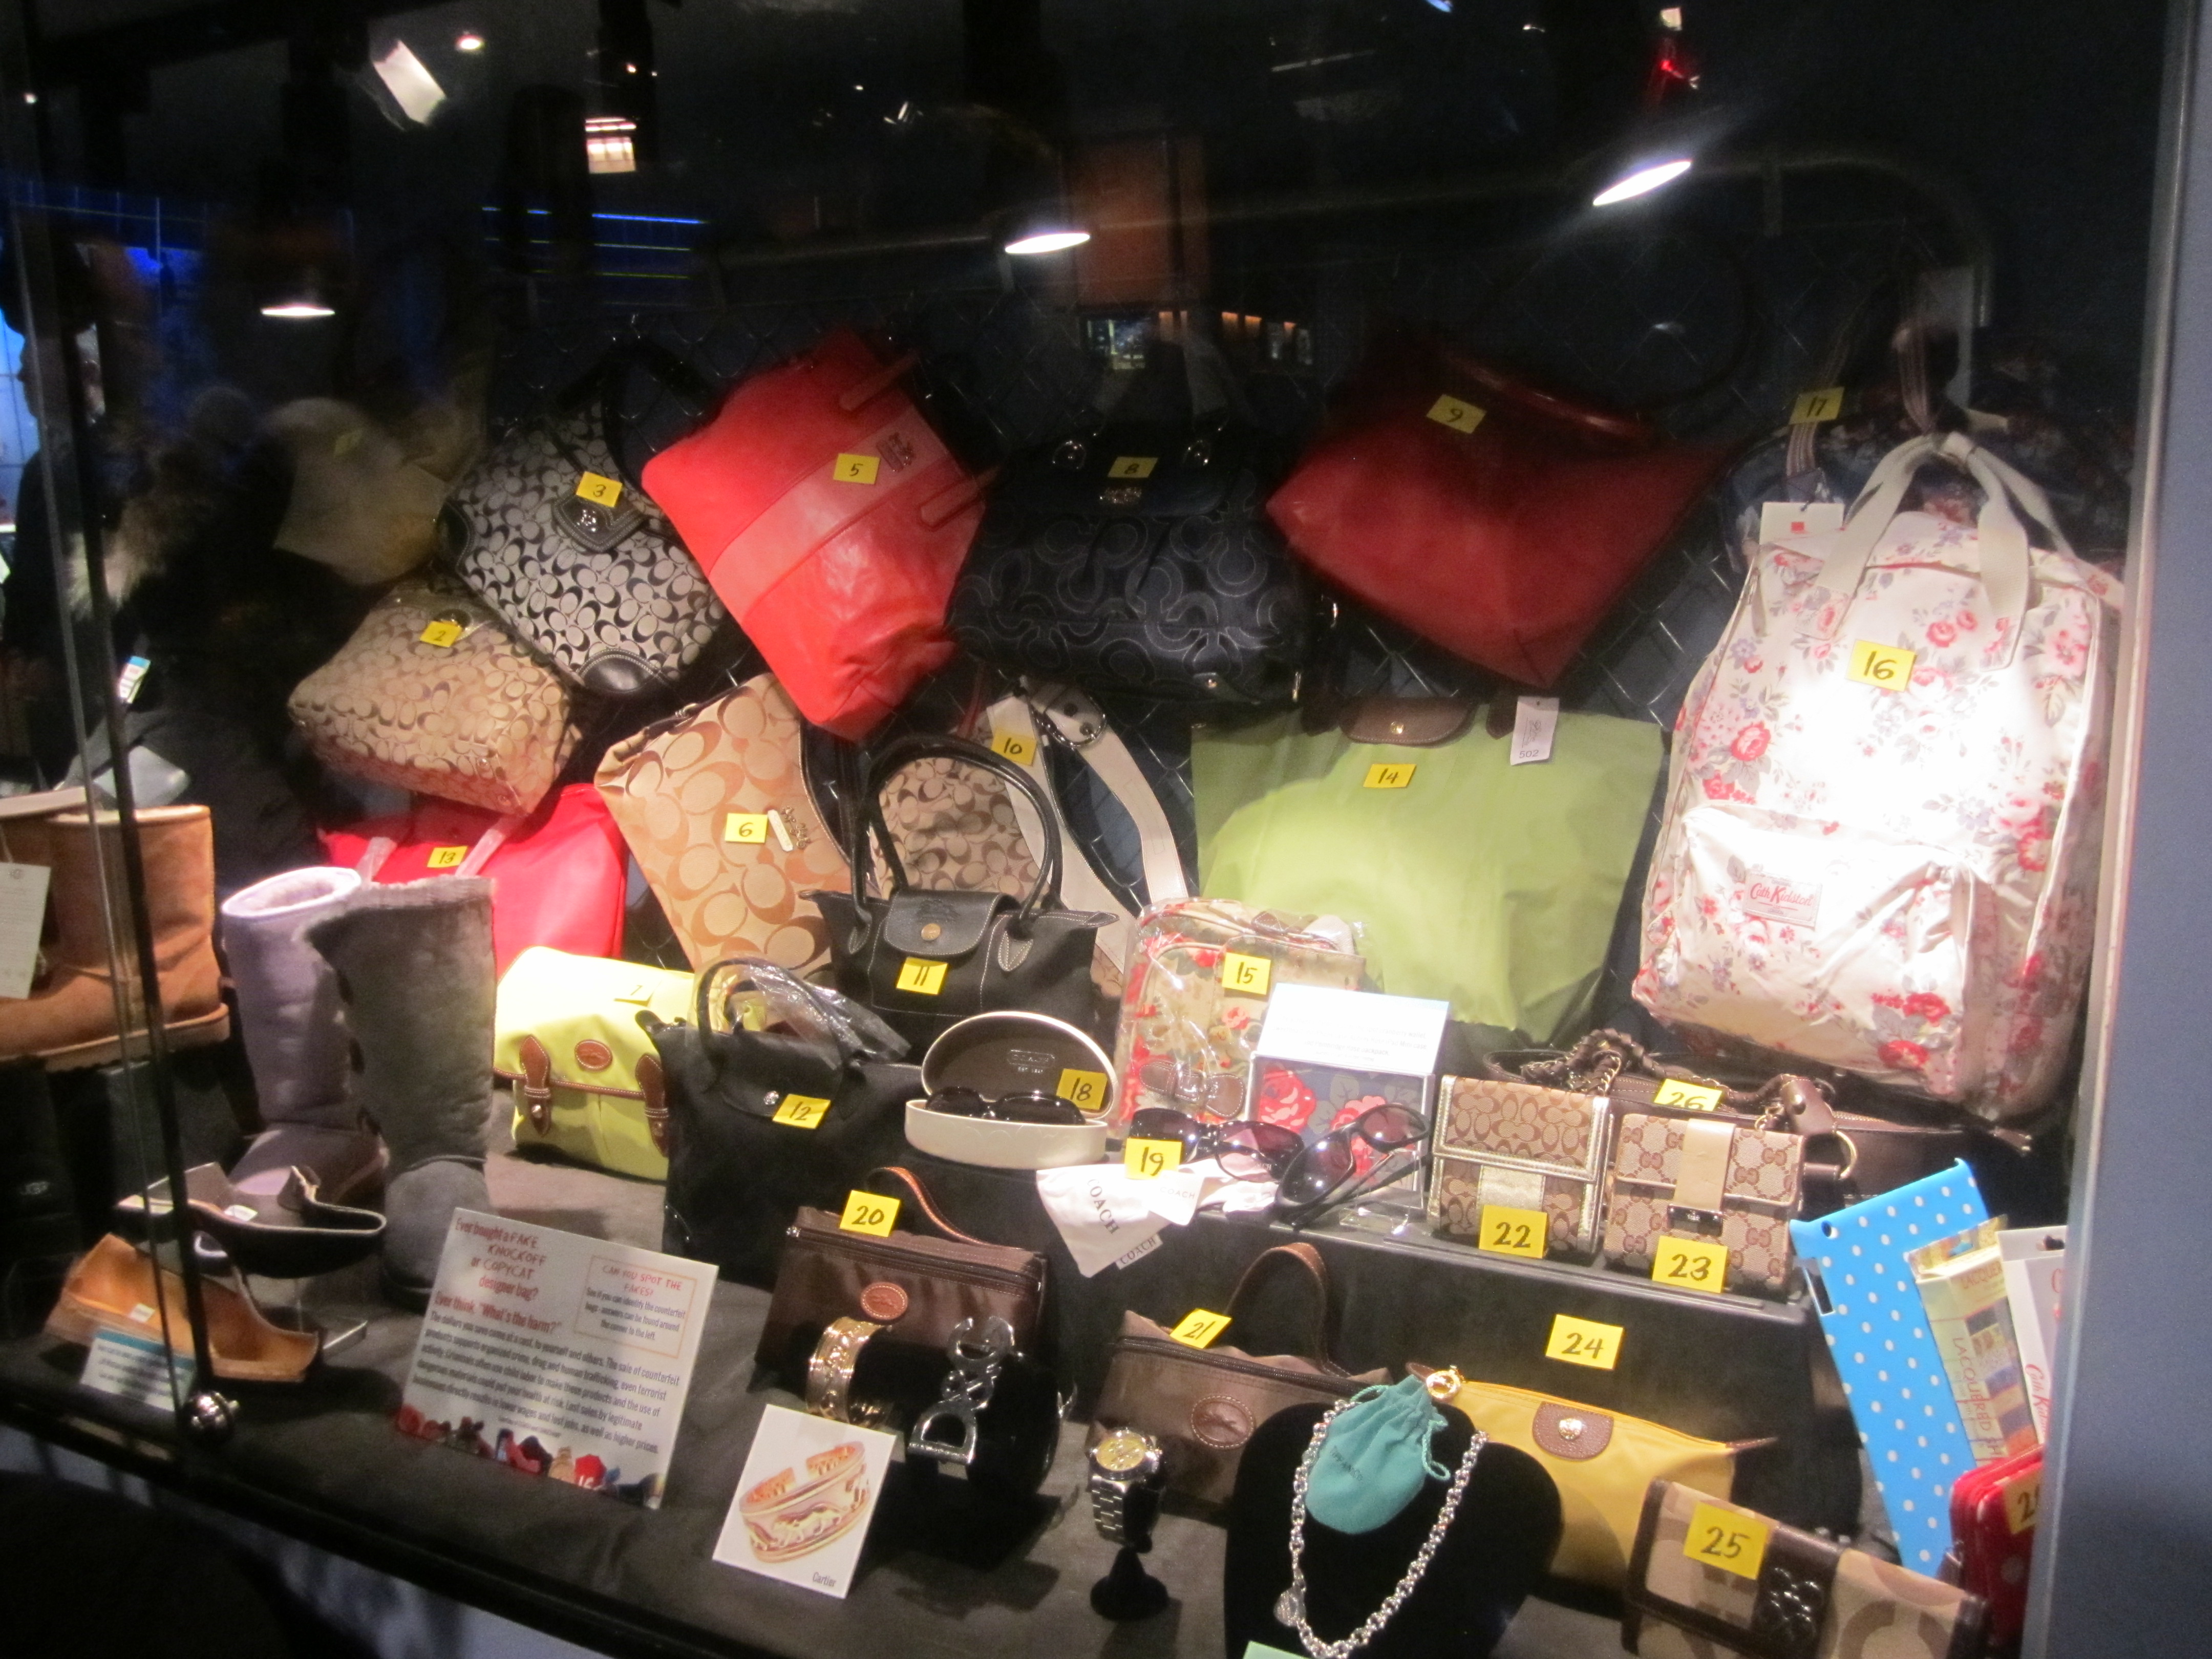 New Permanent Exhibit at Crime Museum Puts Purchases into Criminal Perspective